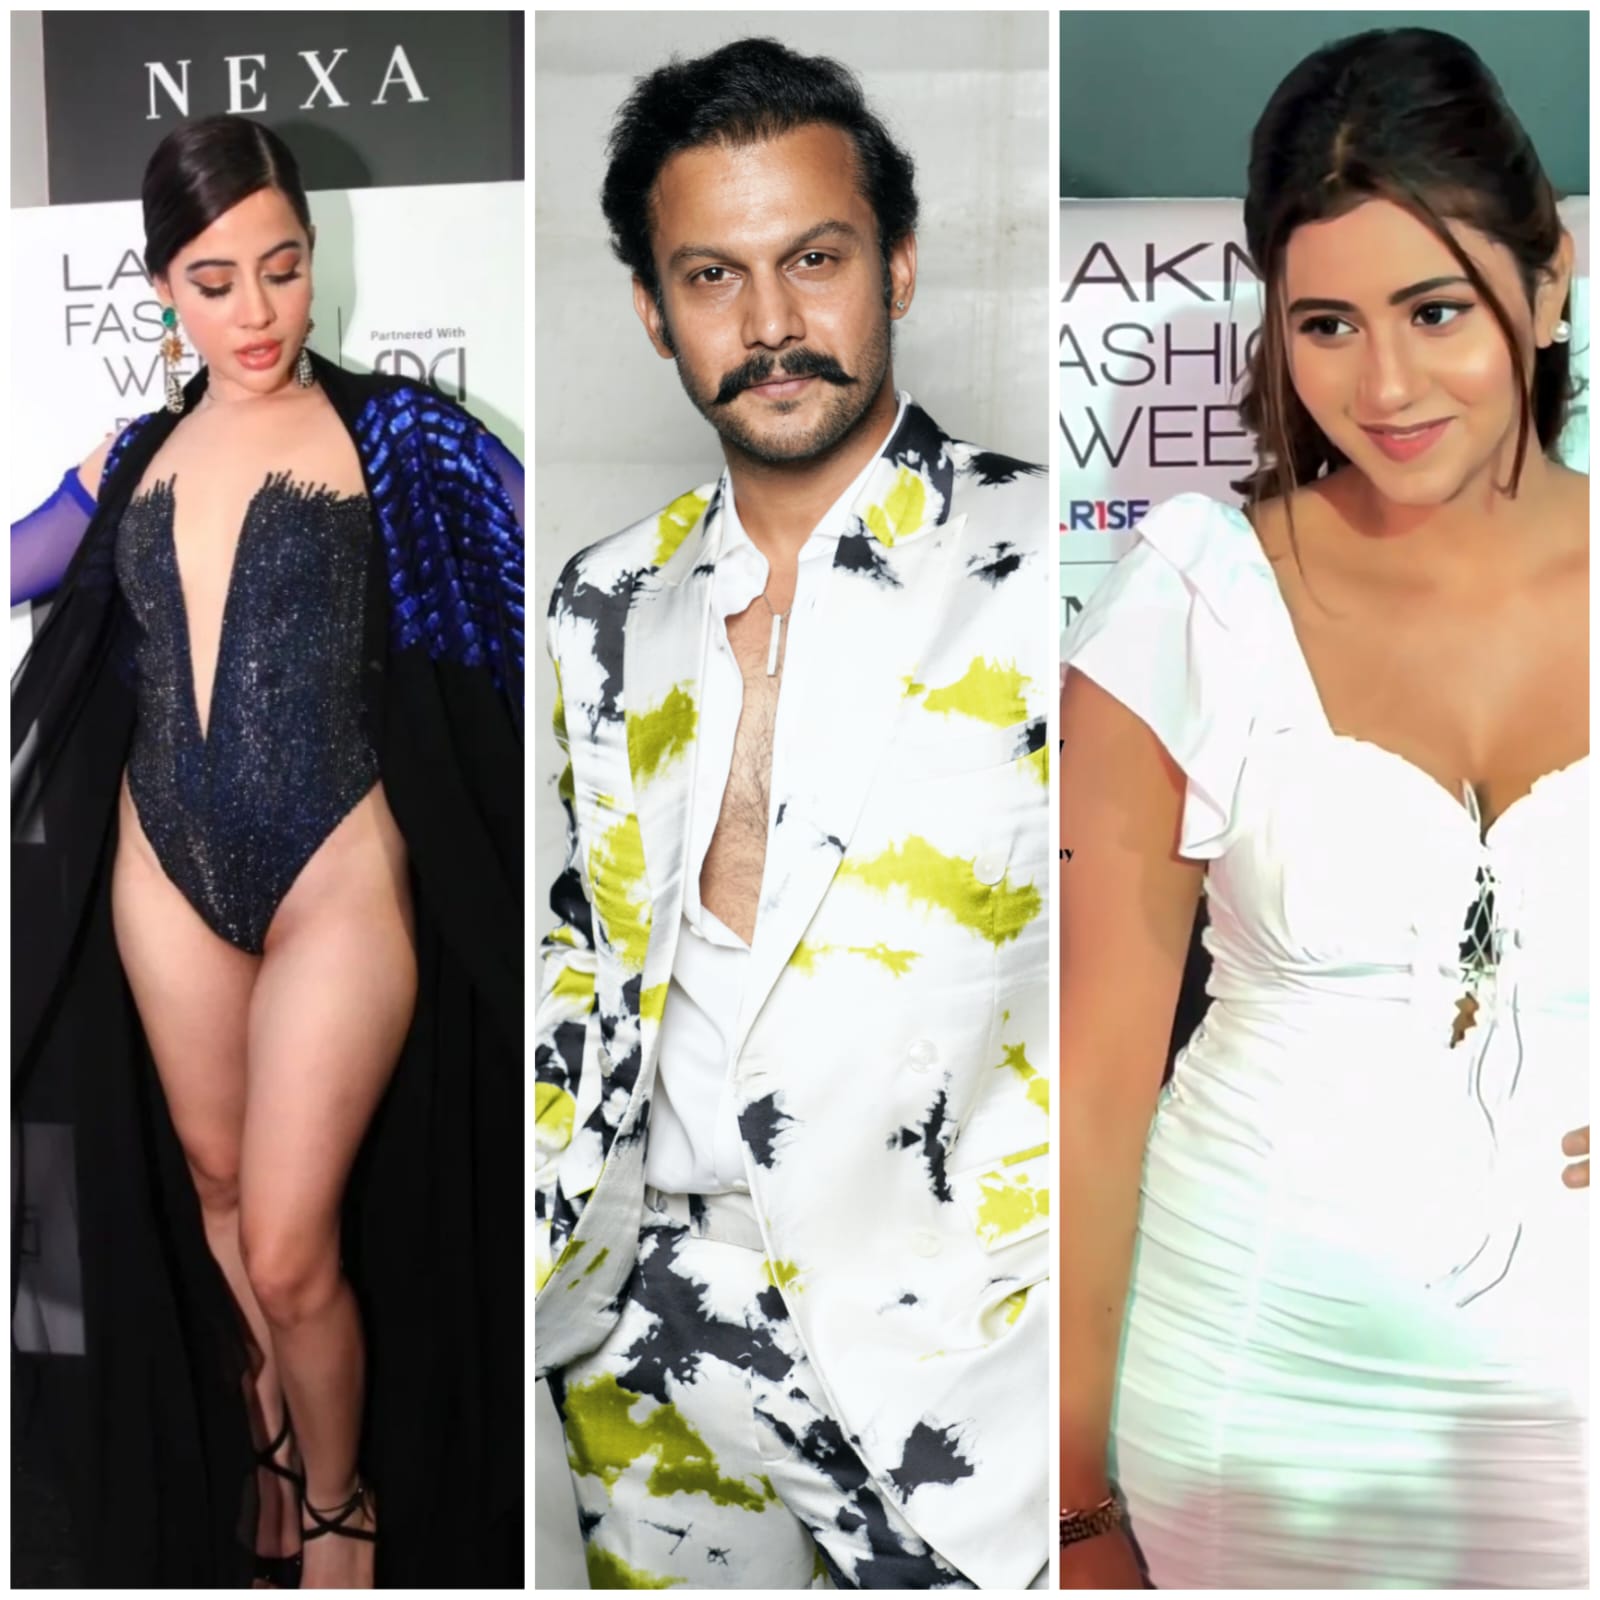 Uorfi Javed, Anjali Arora, Addinath Kothare and more steal the show at Lakme fashion week, made absolutely jaw-dropping appearances at the event